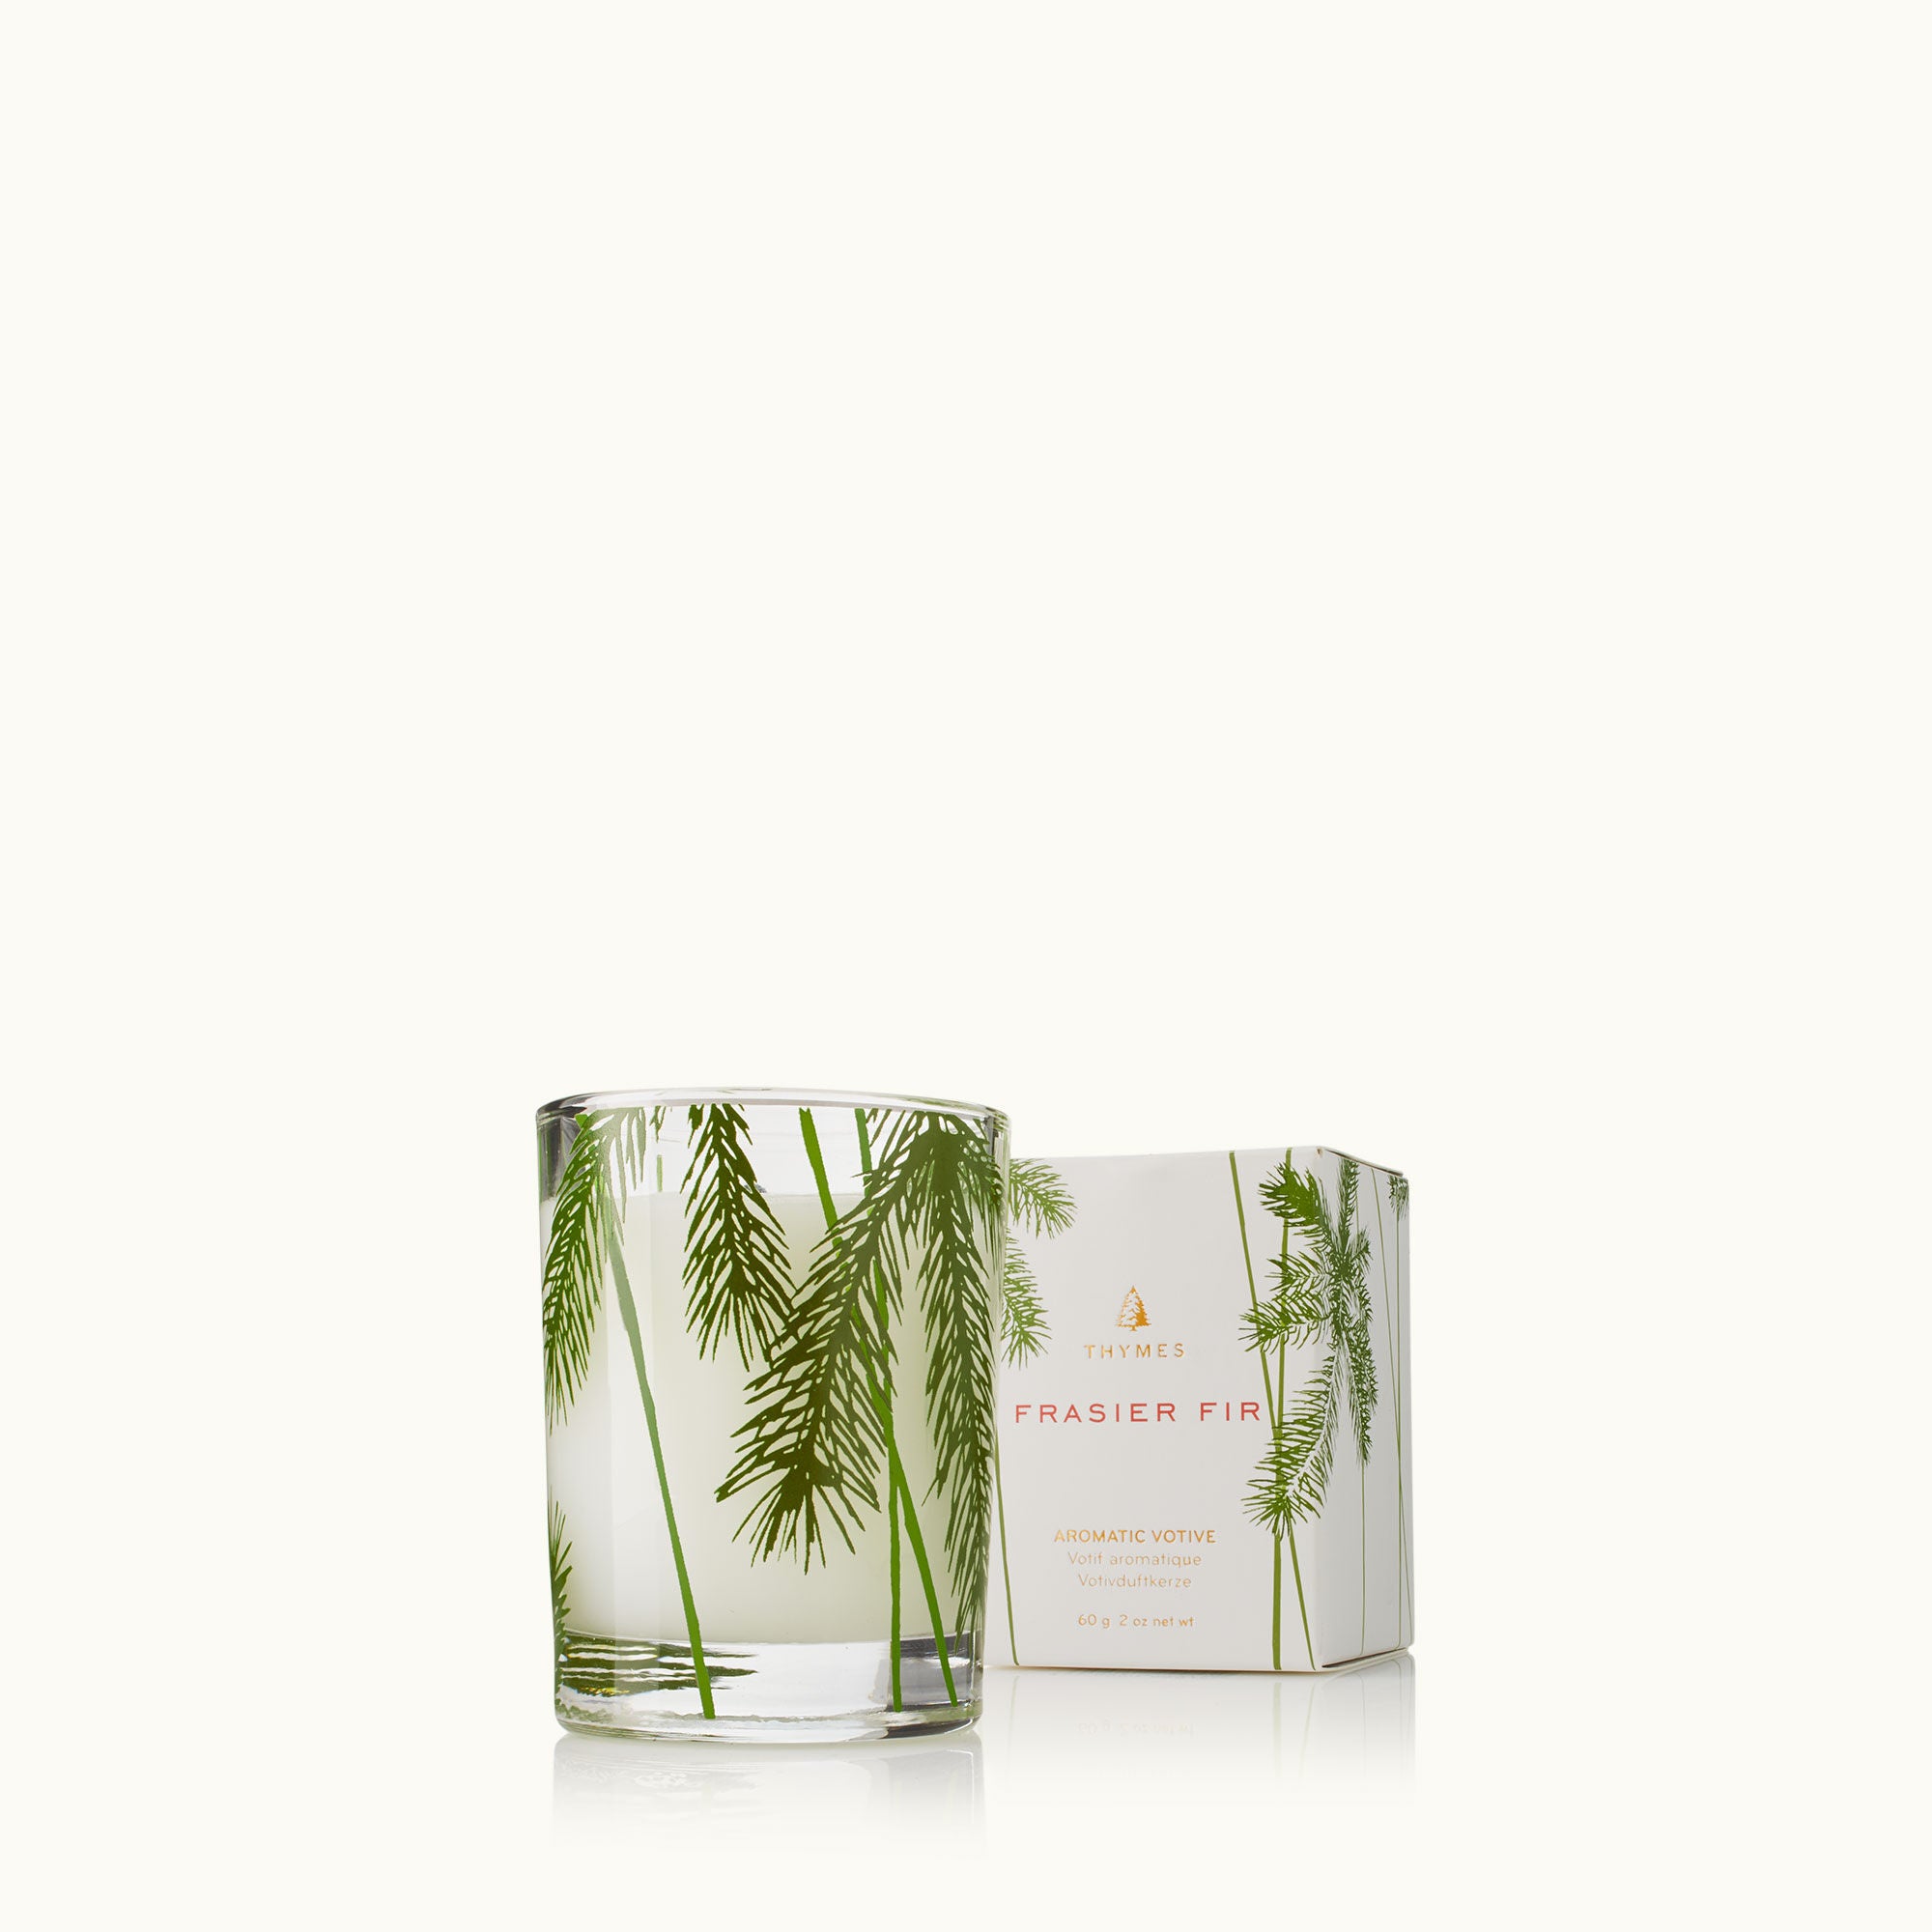 Thymes Frasier Fir Votive Candle - Petite Pine Needle